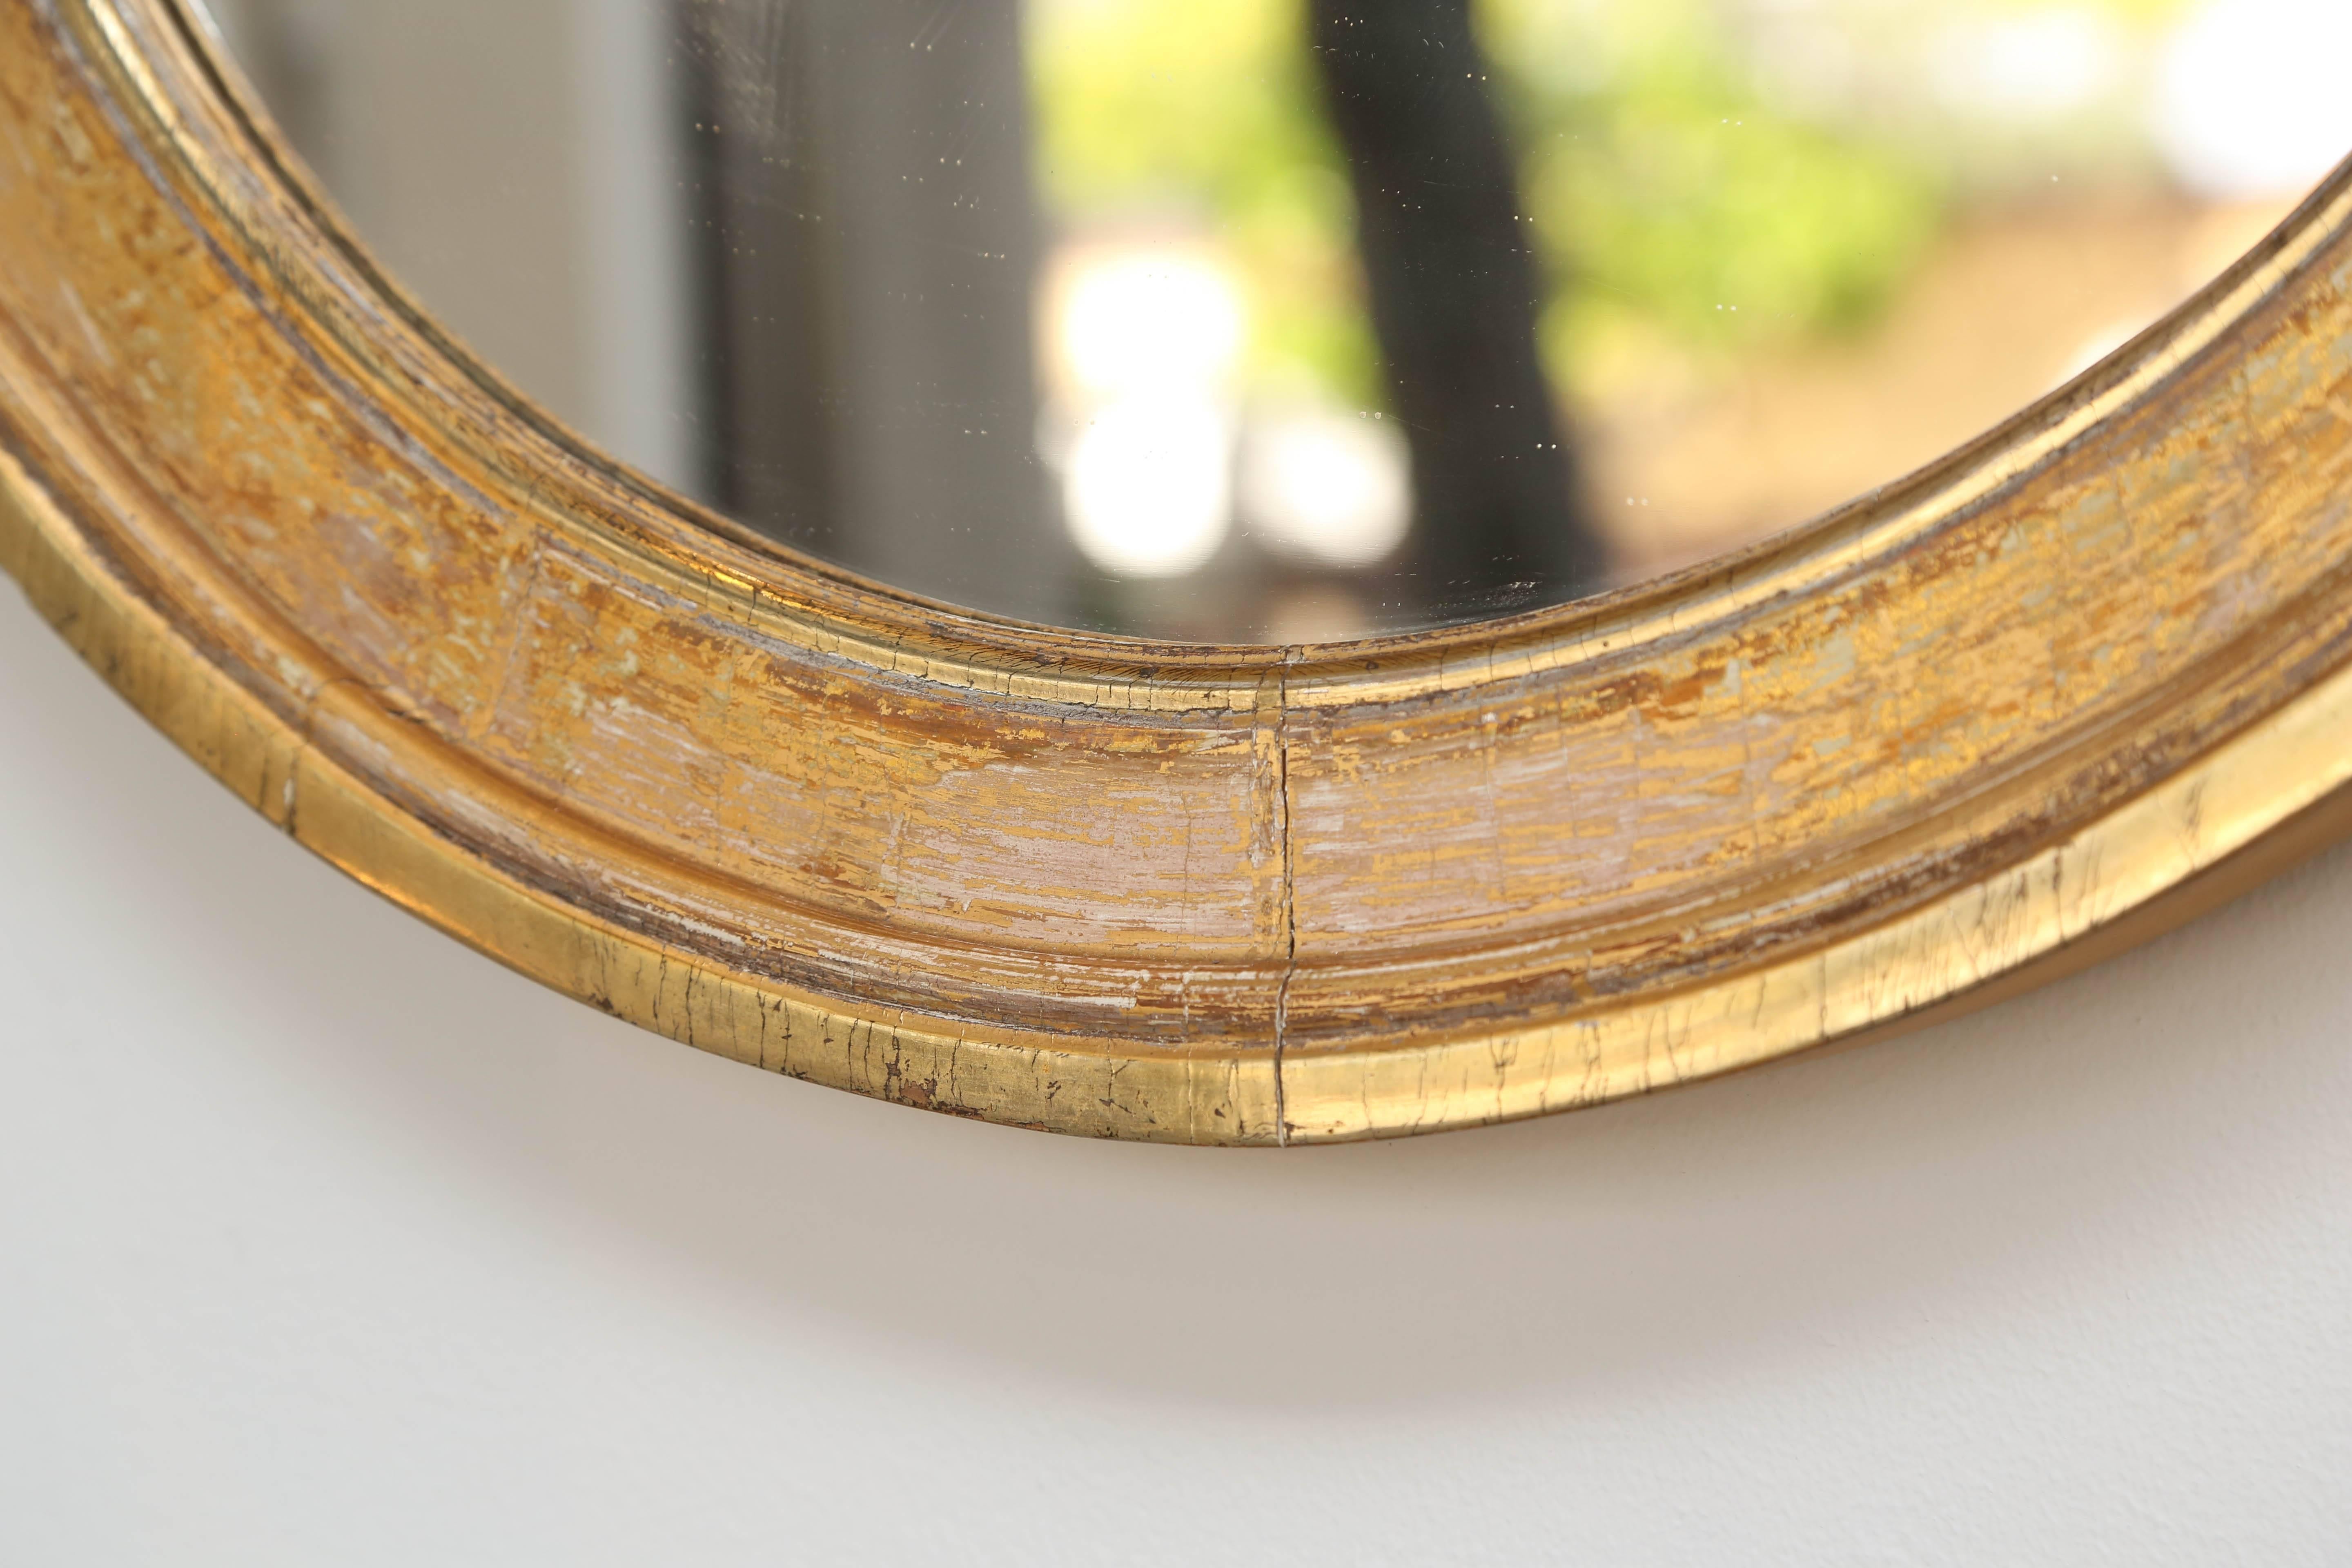 Pair of Antique Swedish Late Gustavian Giltwood Mirrors, Early 19th Century For Sale 4